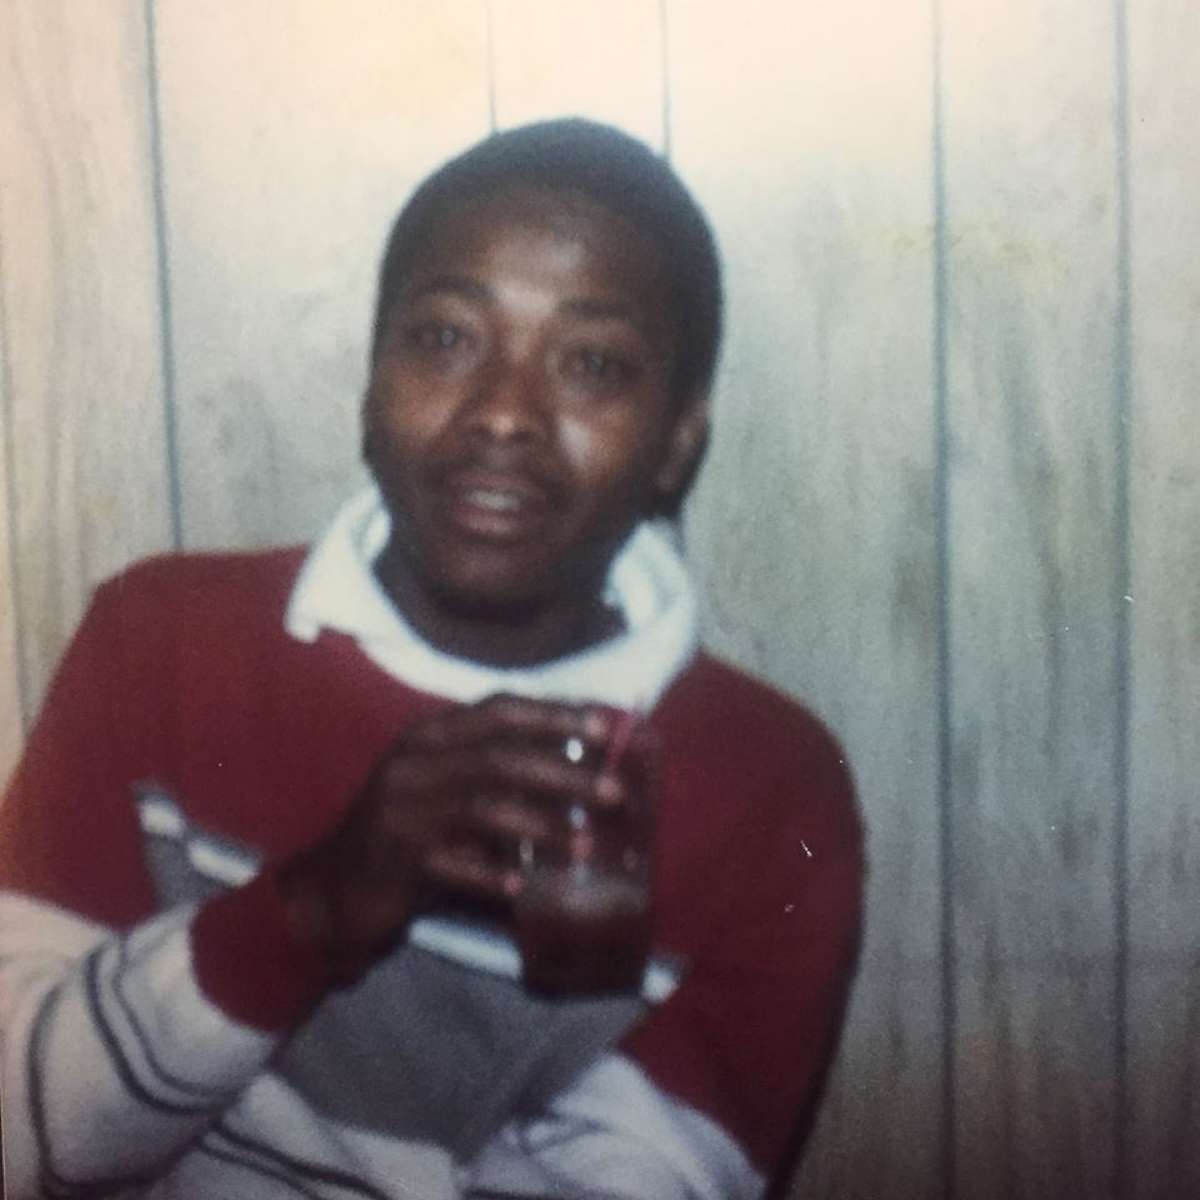 PHOTO: Timothy Coggins, 23, was found "brutally murdered" on Oct. 9, 1983 in Sunnyside, Georgia, according to authorities.